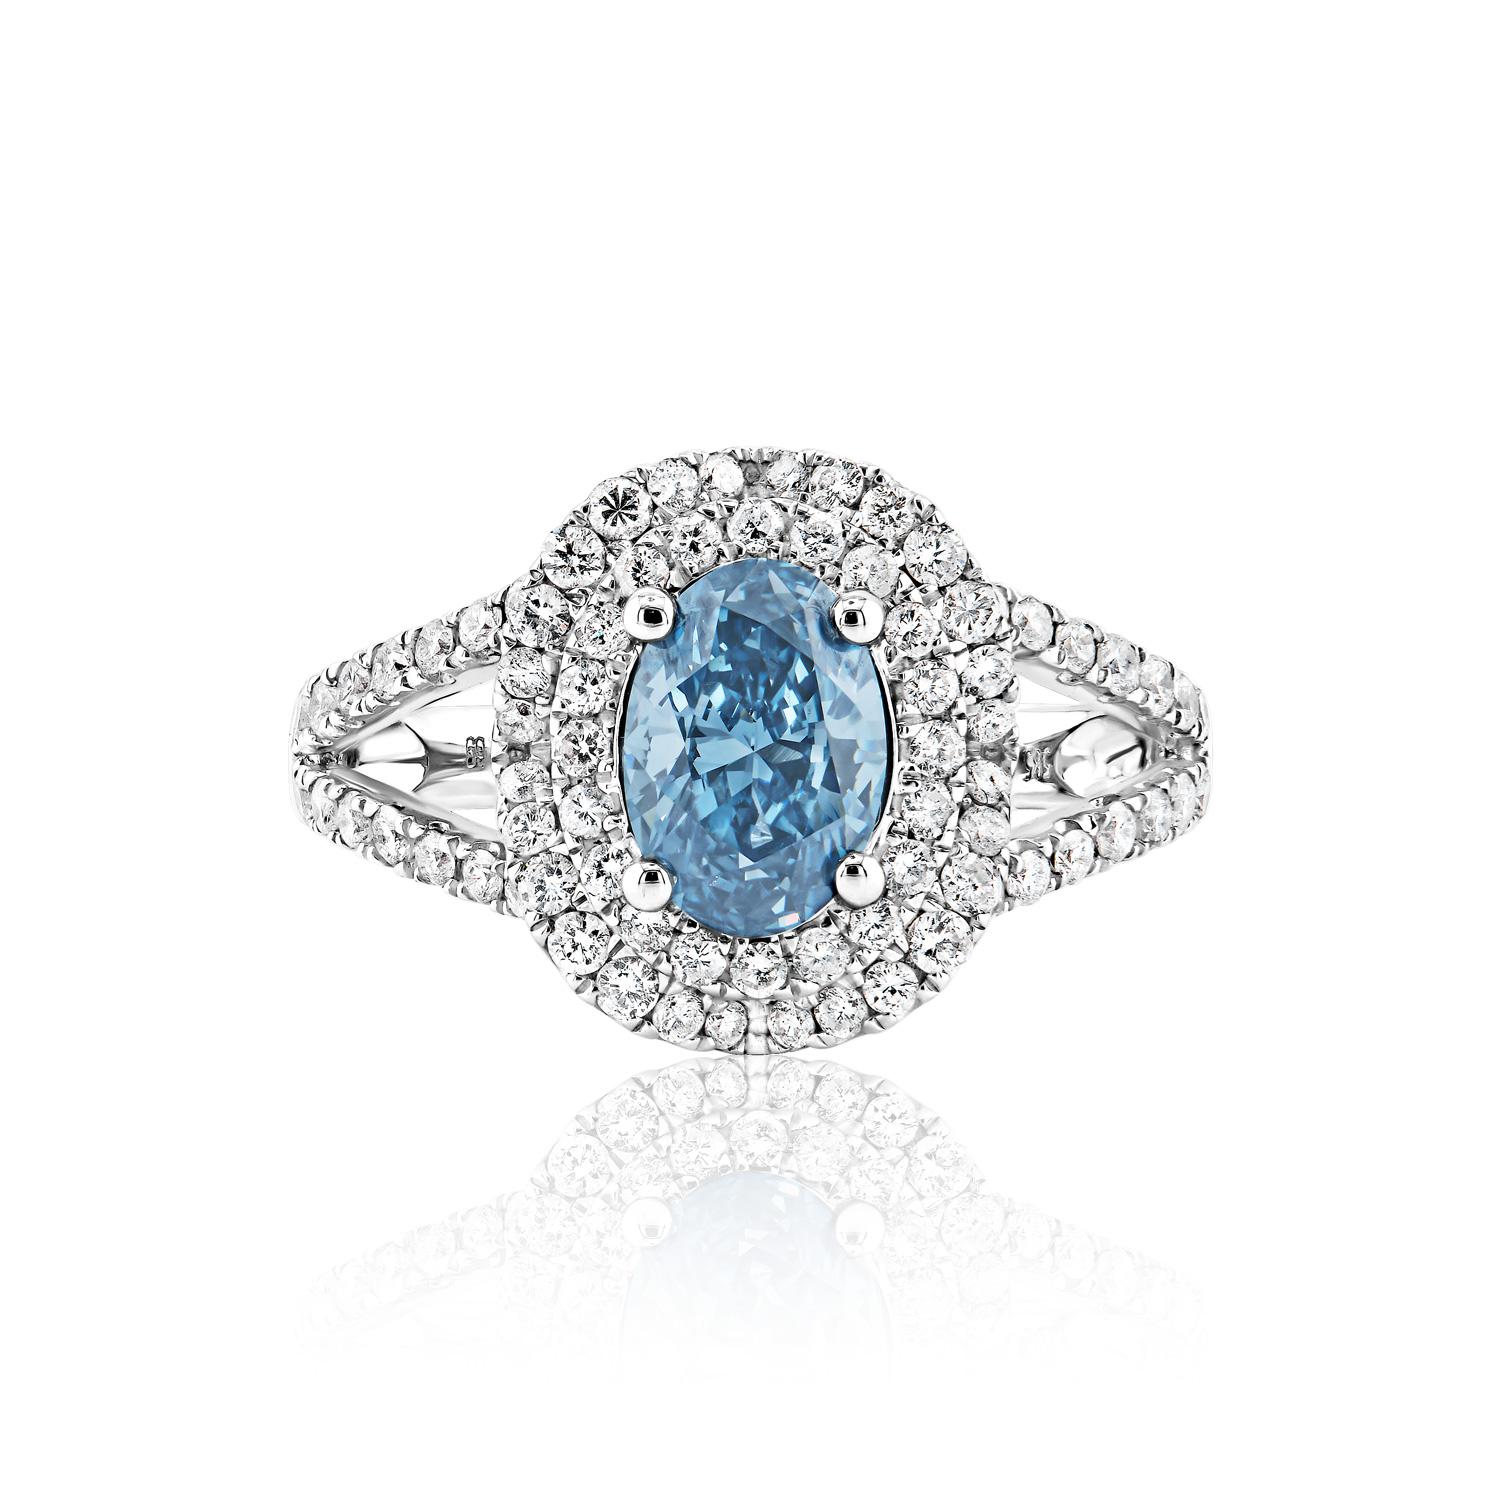 
GIA CERTIFIED
Center Diamond:

Carat Weight: 1.01 Carats
Color : Fancy Deep Greenish Blue
Style: Oval Cut

Ring:
Settings: Double Halo, Split shank & 4 Round Prong
Metal: 14 Karat White Gold 4.69 Grams
Style: Round Brilliant Cut
Carat Weight: 0.71